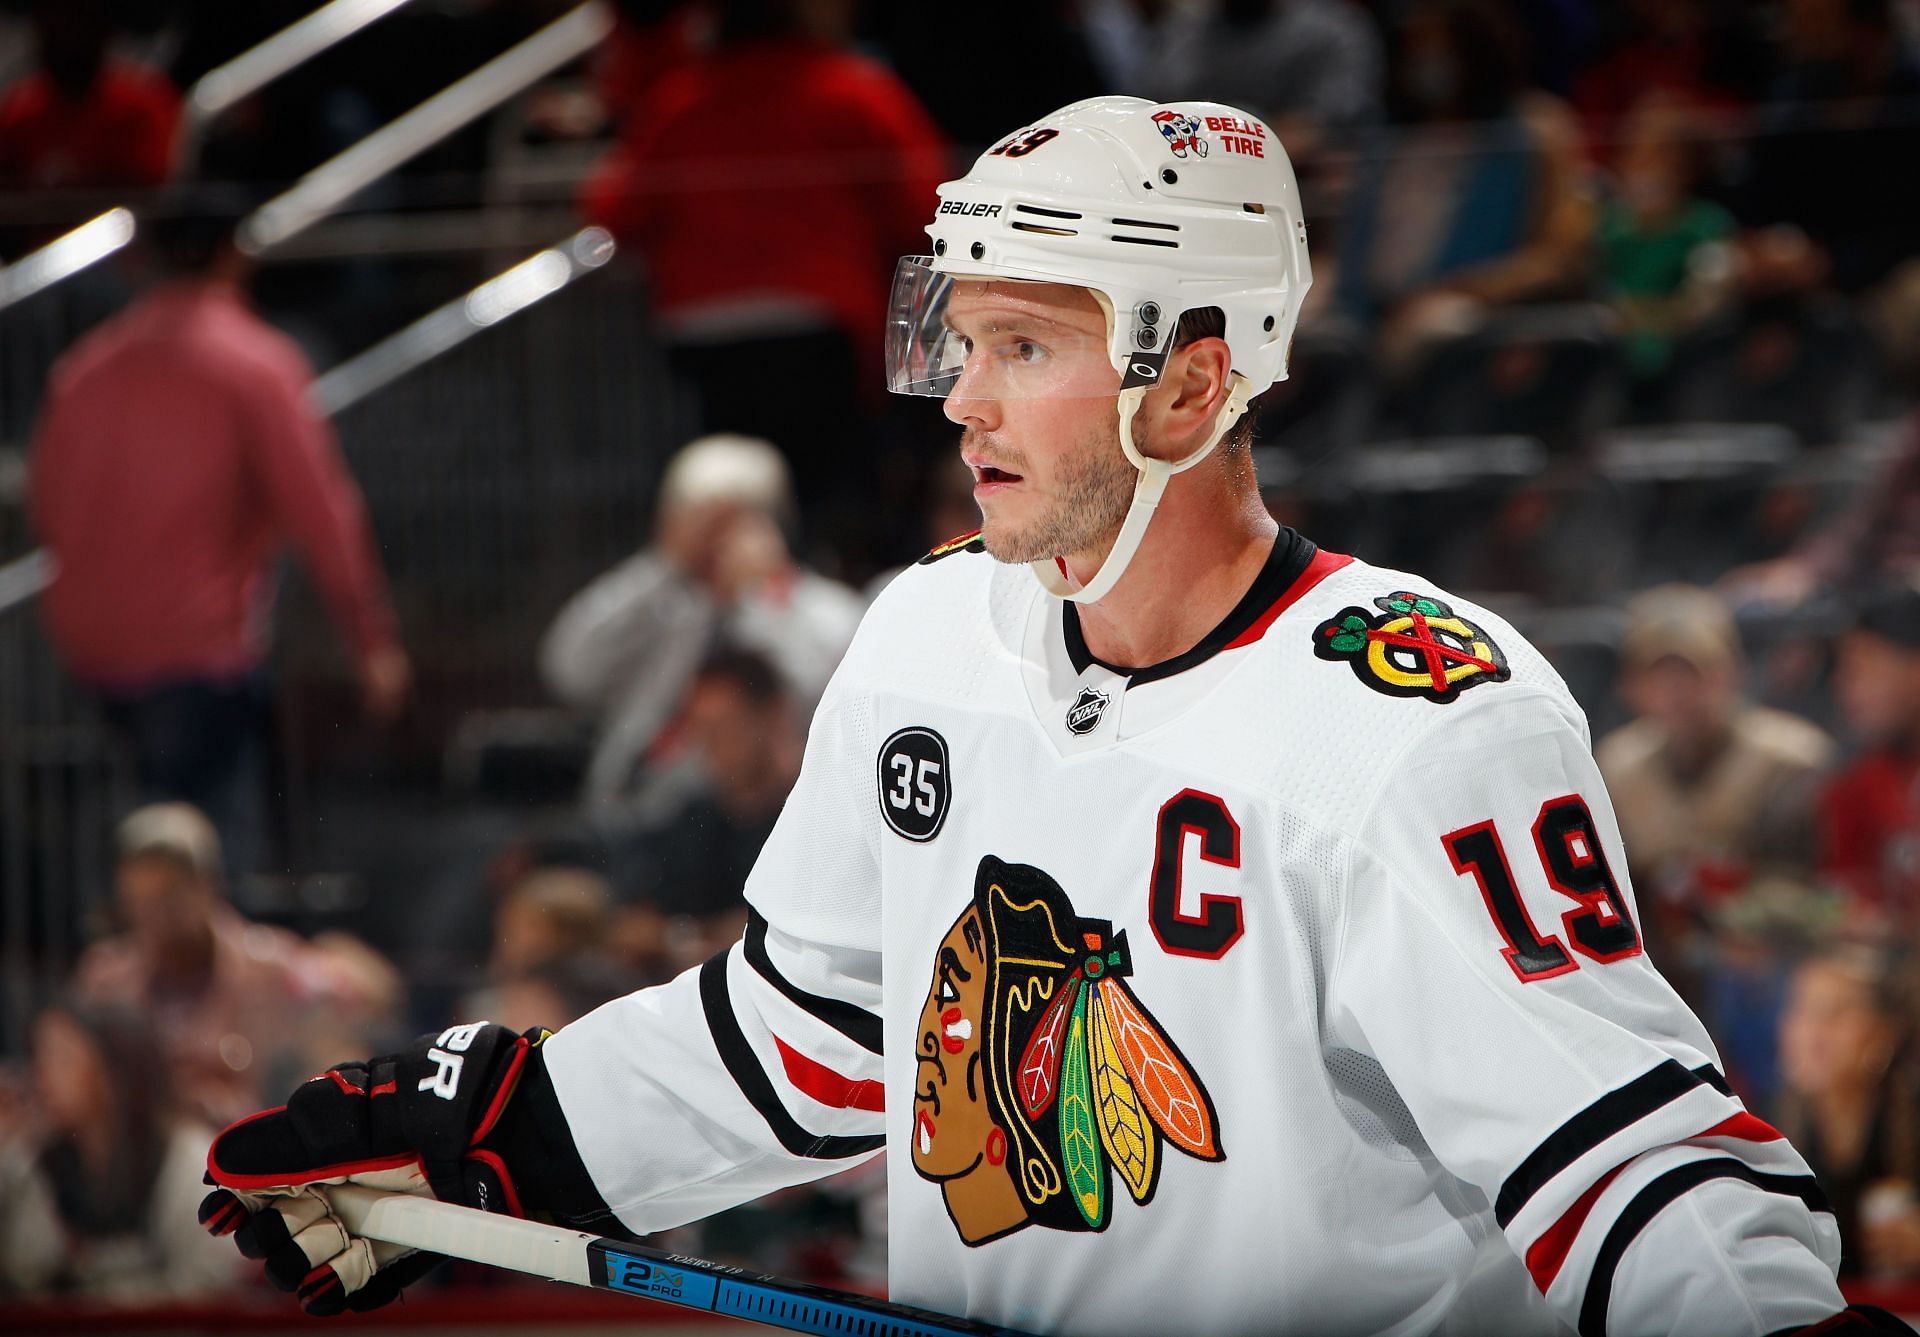 Think he's done: NHL fans speculate Jonathan Toews' retirement